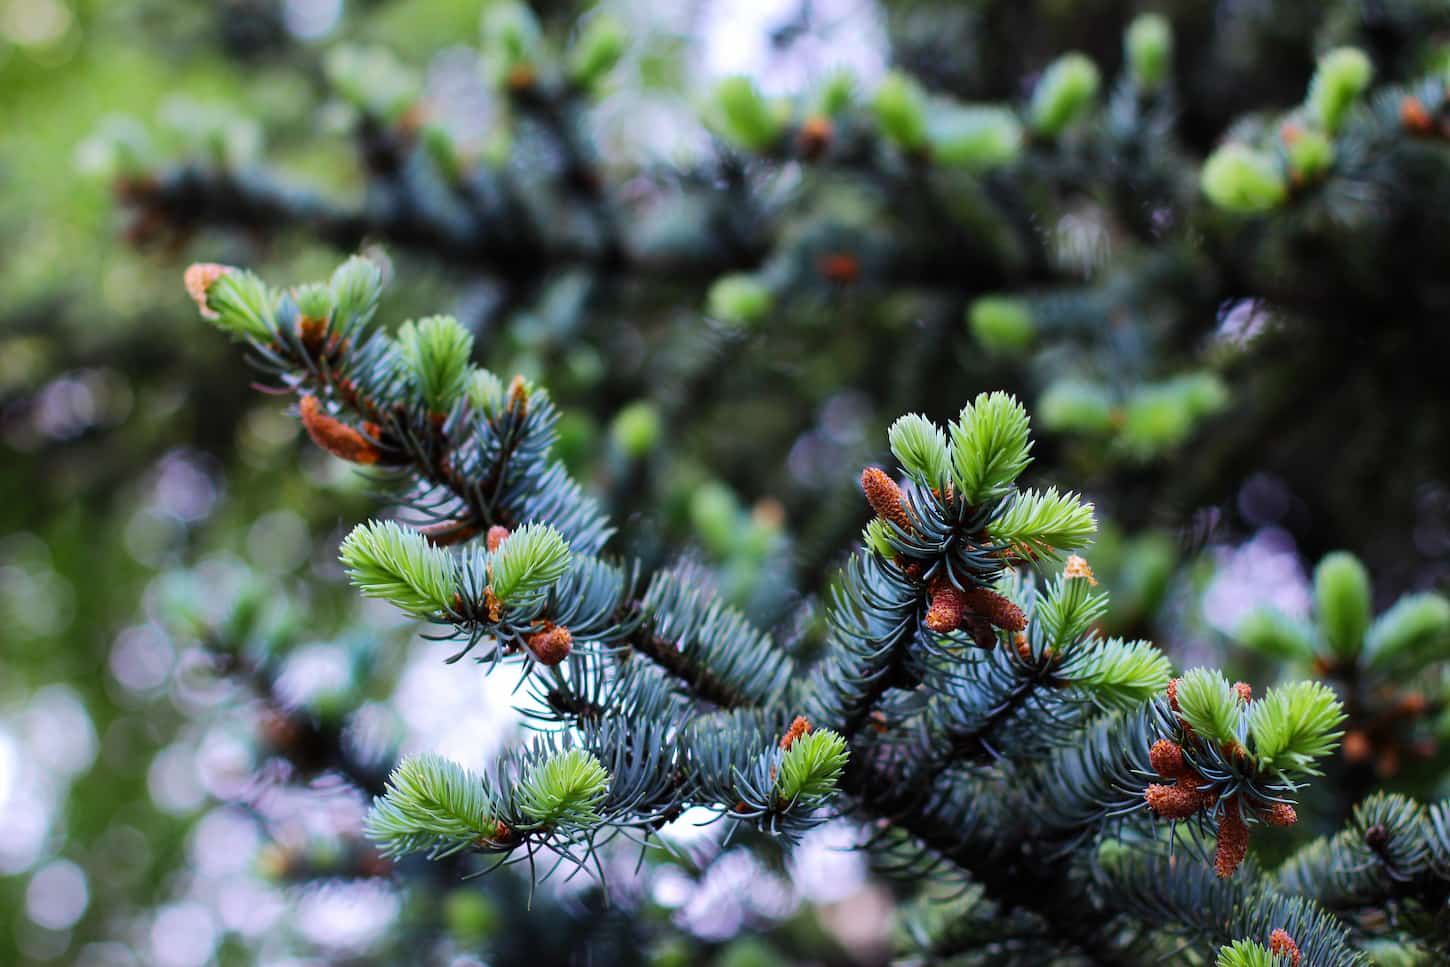 An image of blue spruce with young shoots.